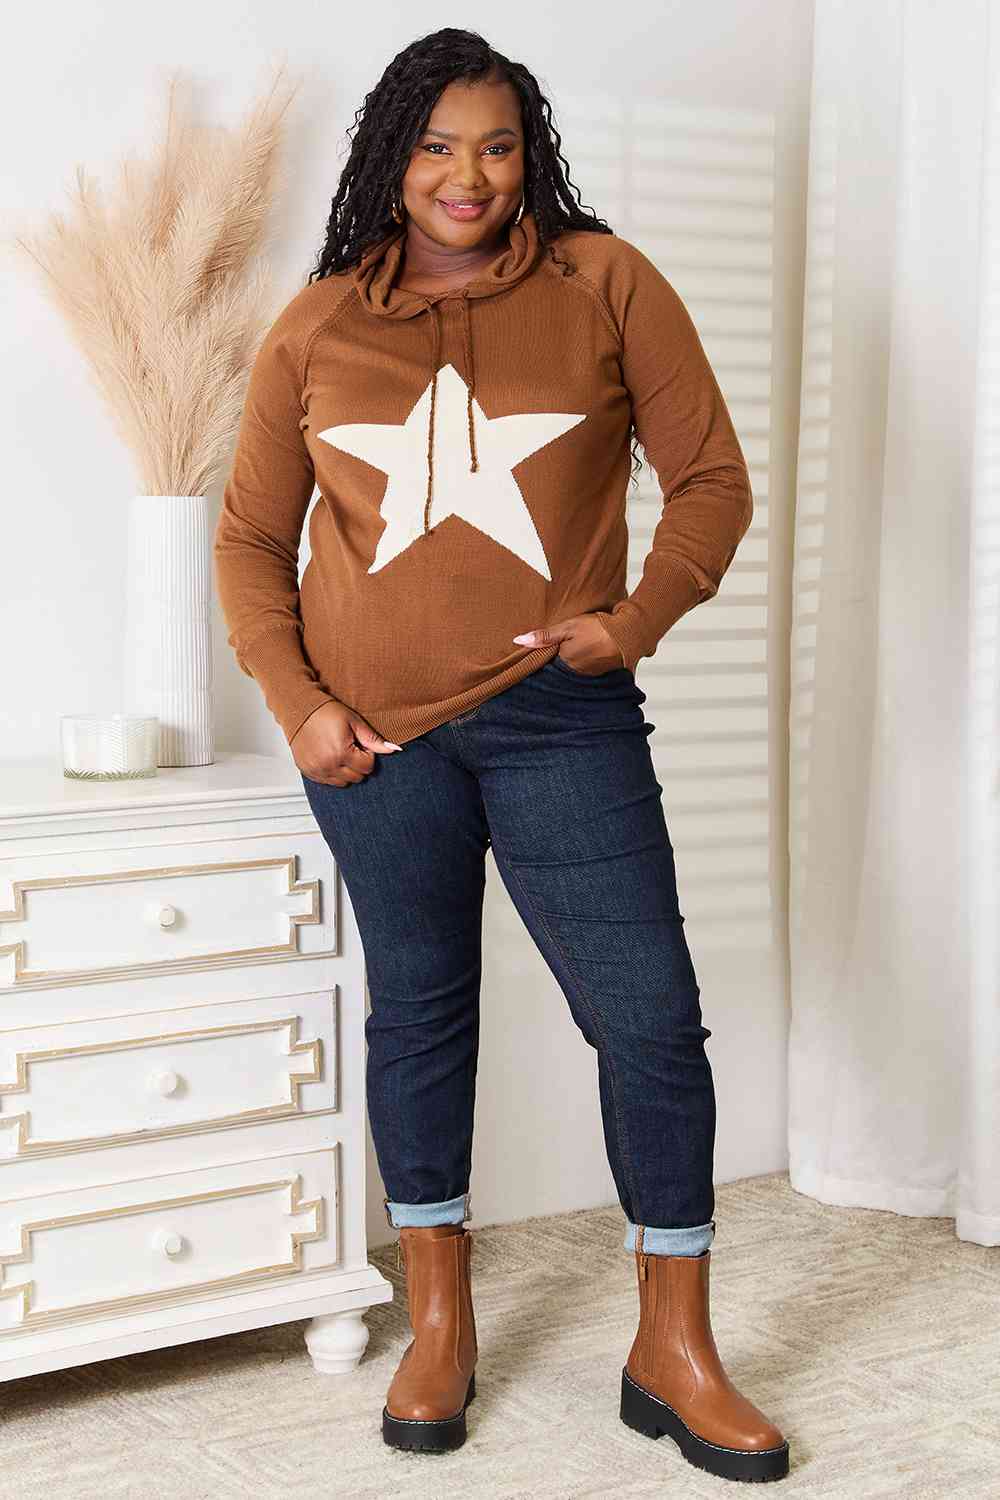 All Star Hooded Sweater